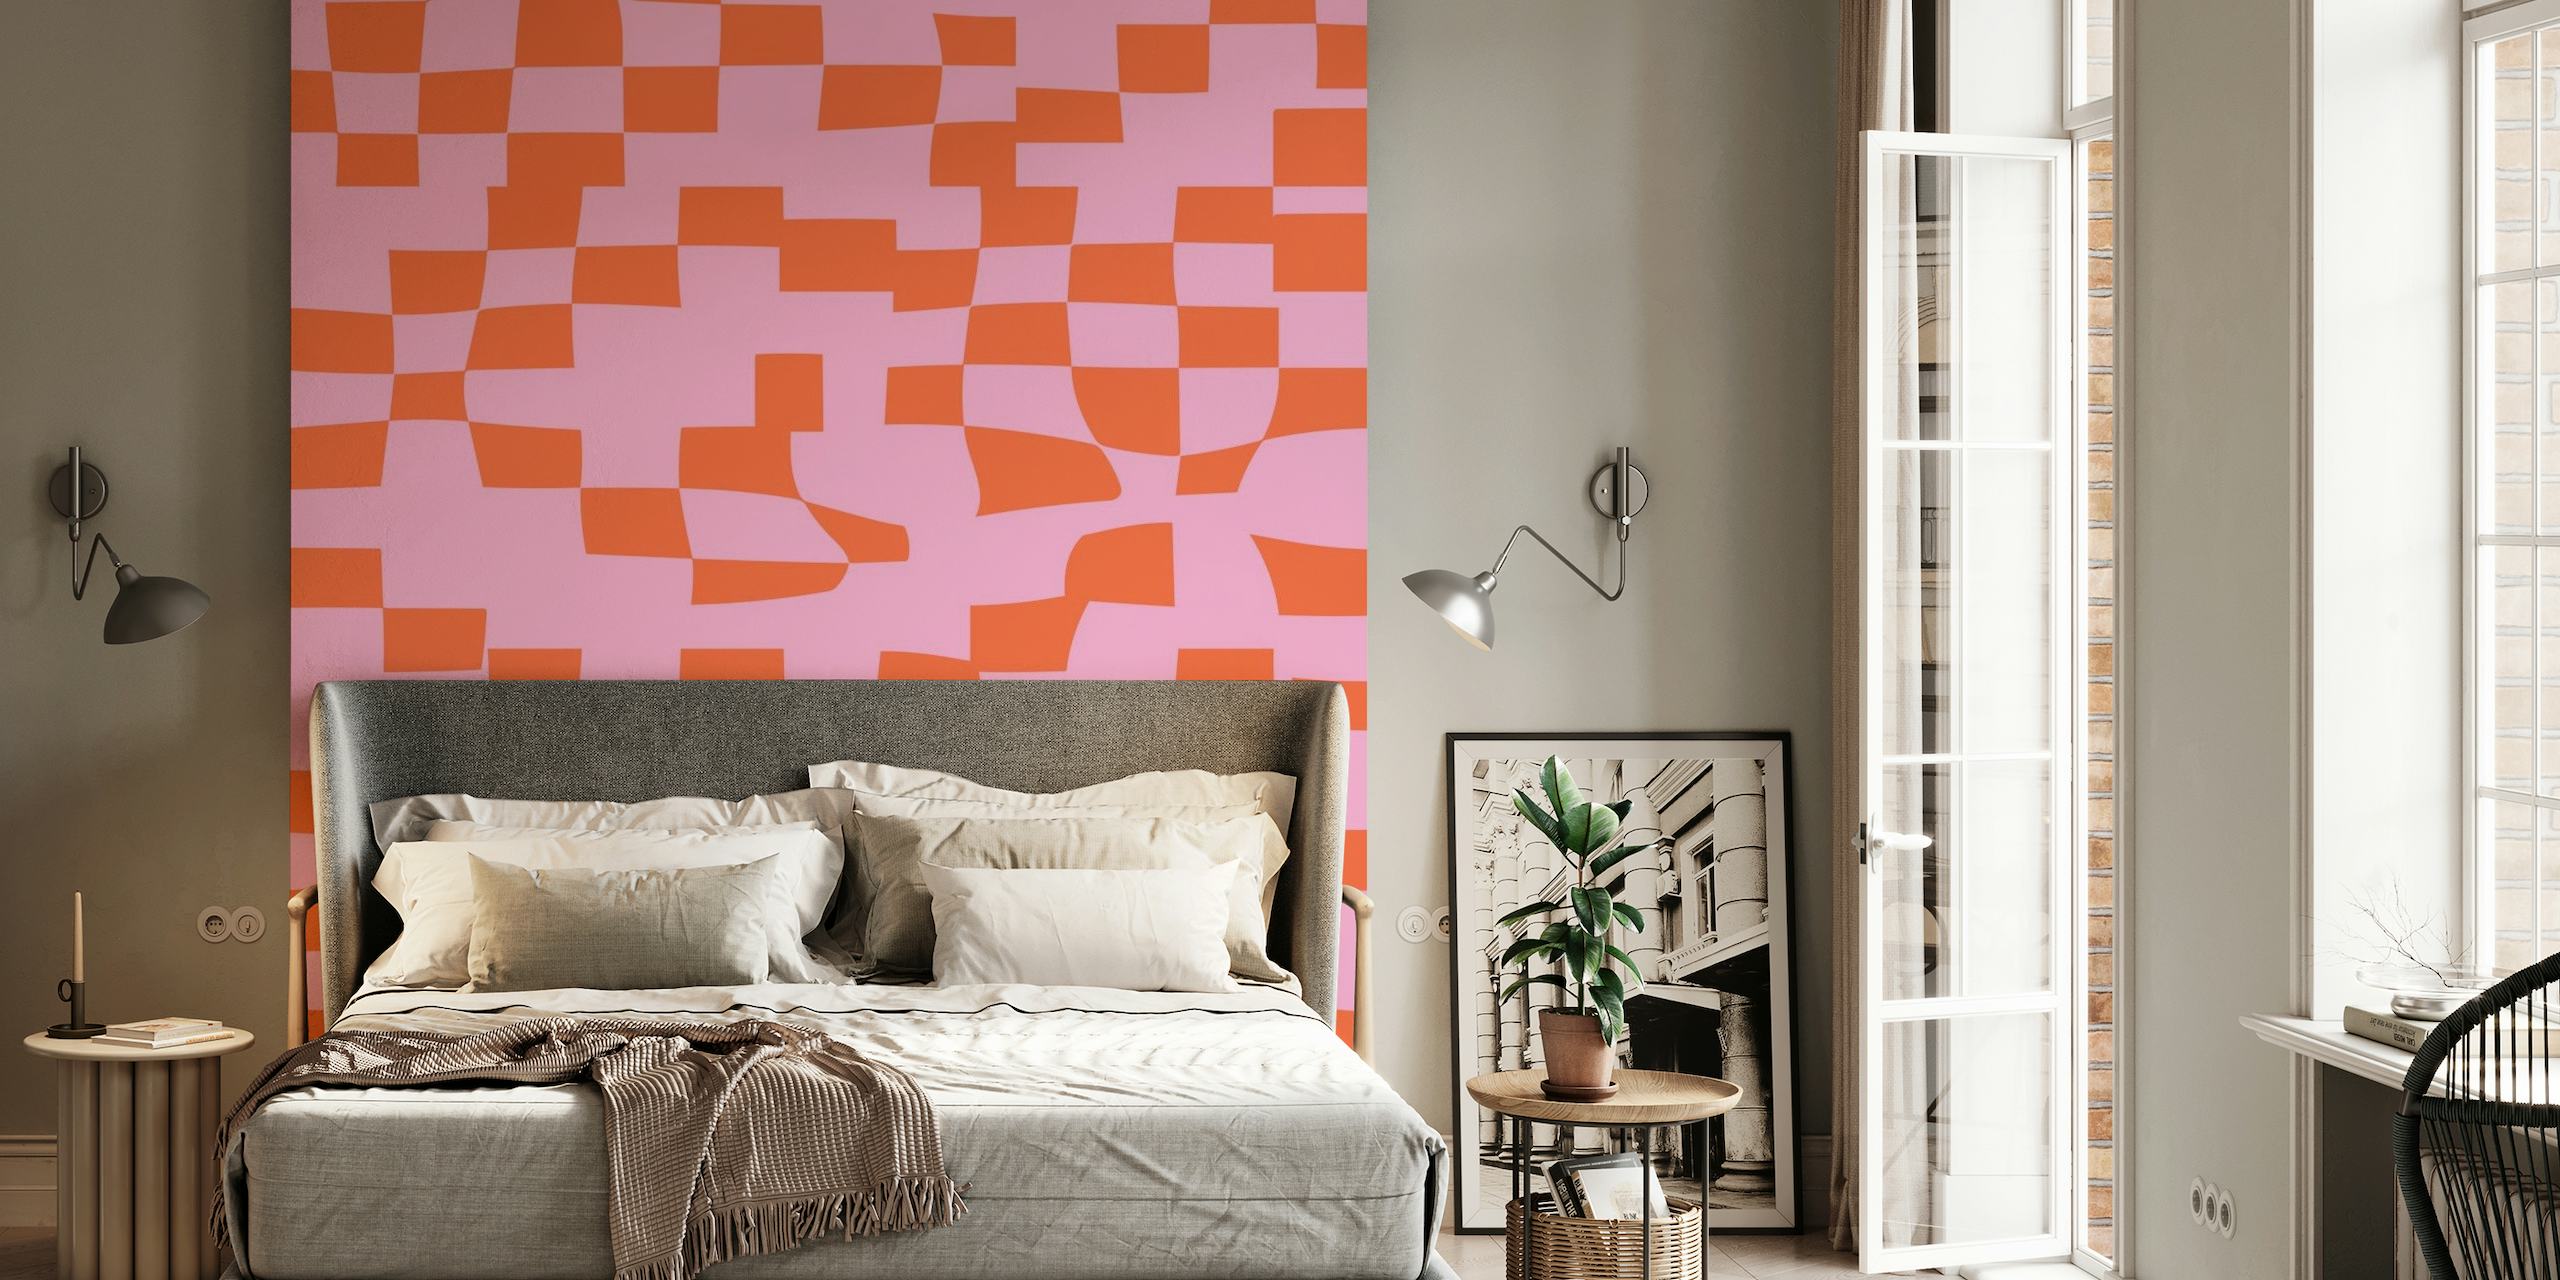 Abstract Checkerboard in Pink and Orange wallpaper